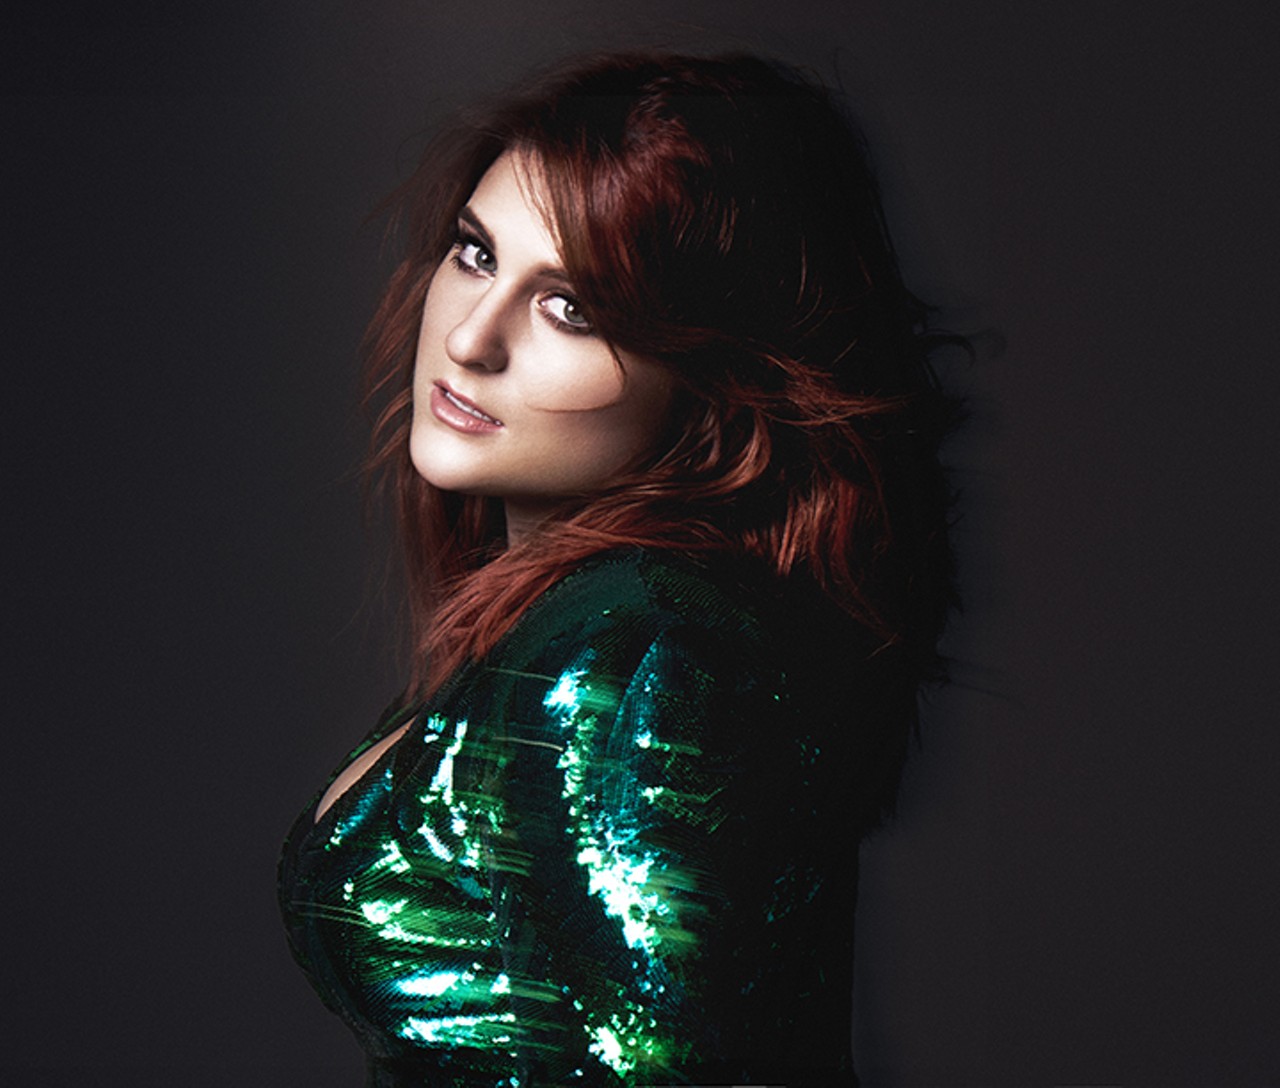 Sunday, Sept. 18Meghan Trainor at CFE Arena